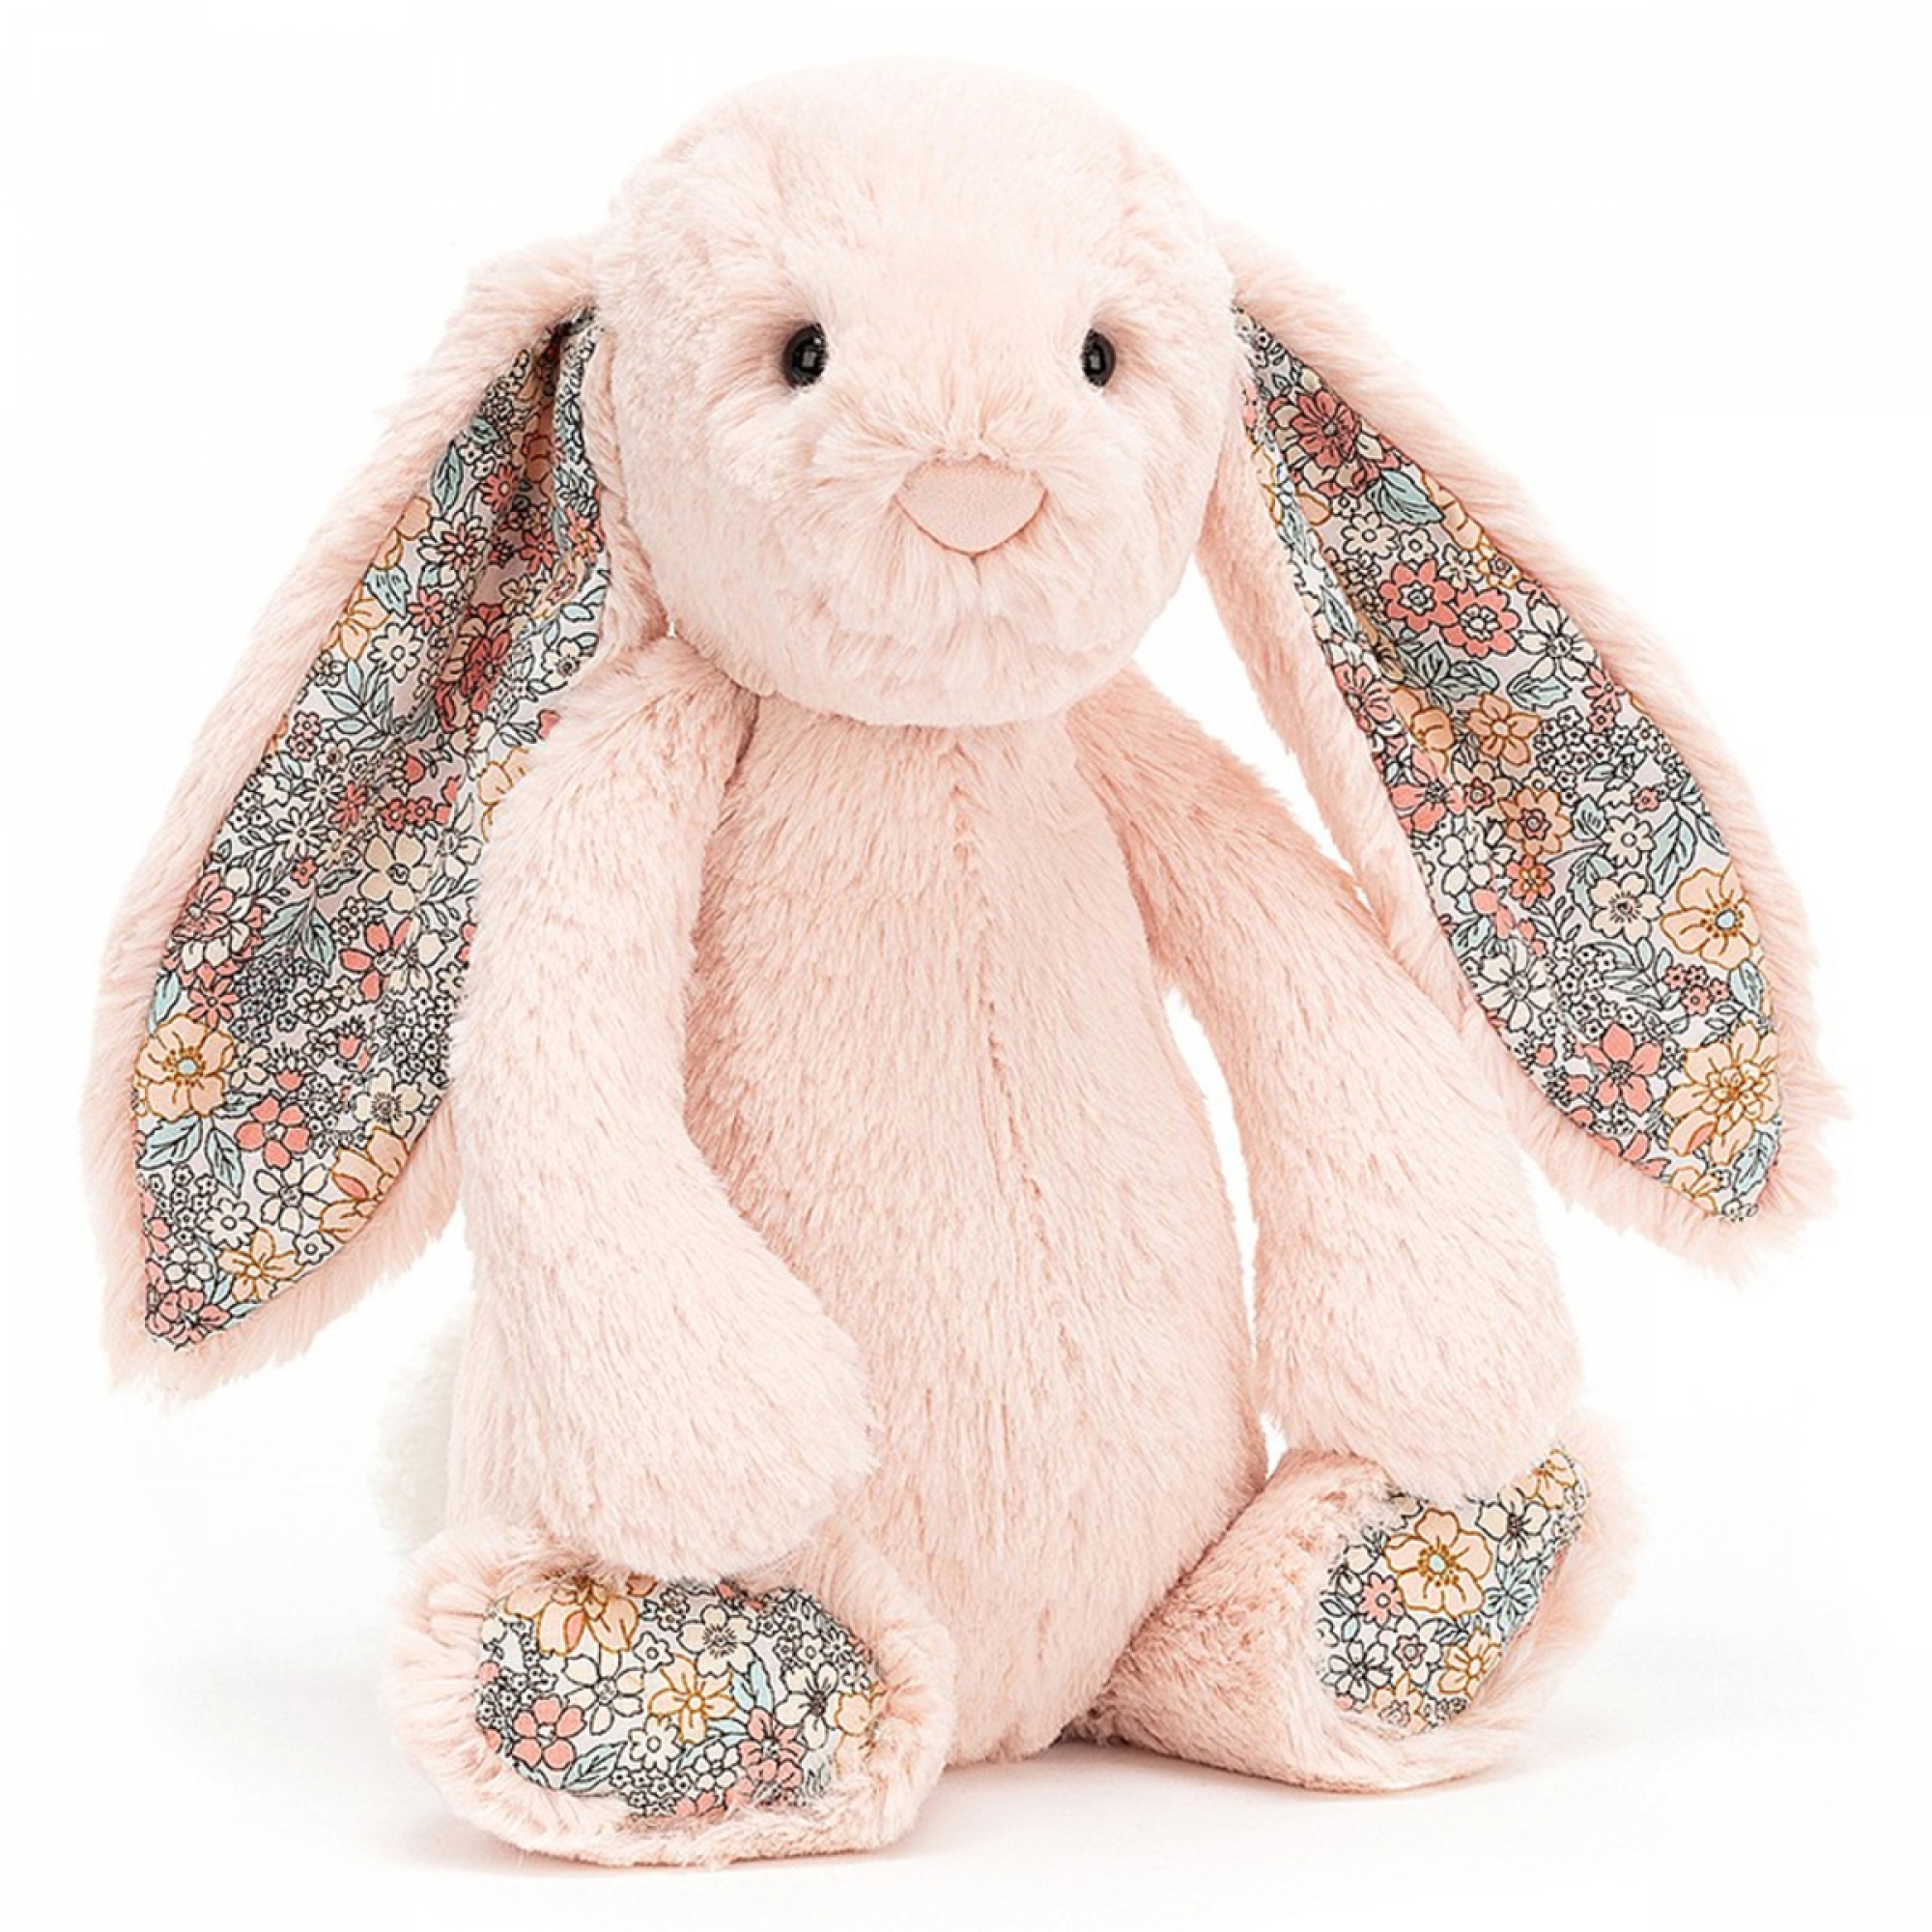 Jellycat Peluche Lapin Blossom Rose Pale 31 Cm Made In Bebe